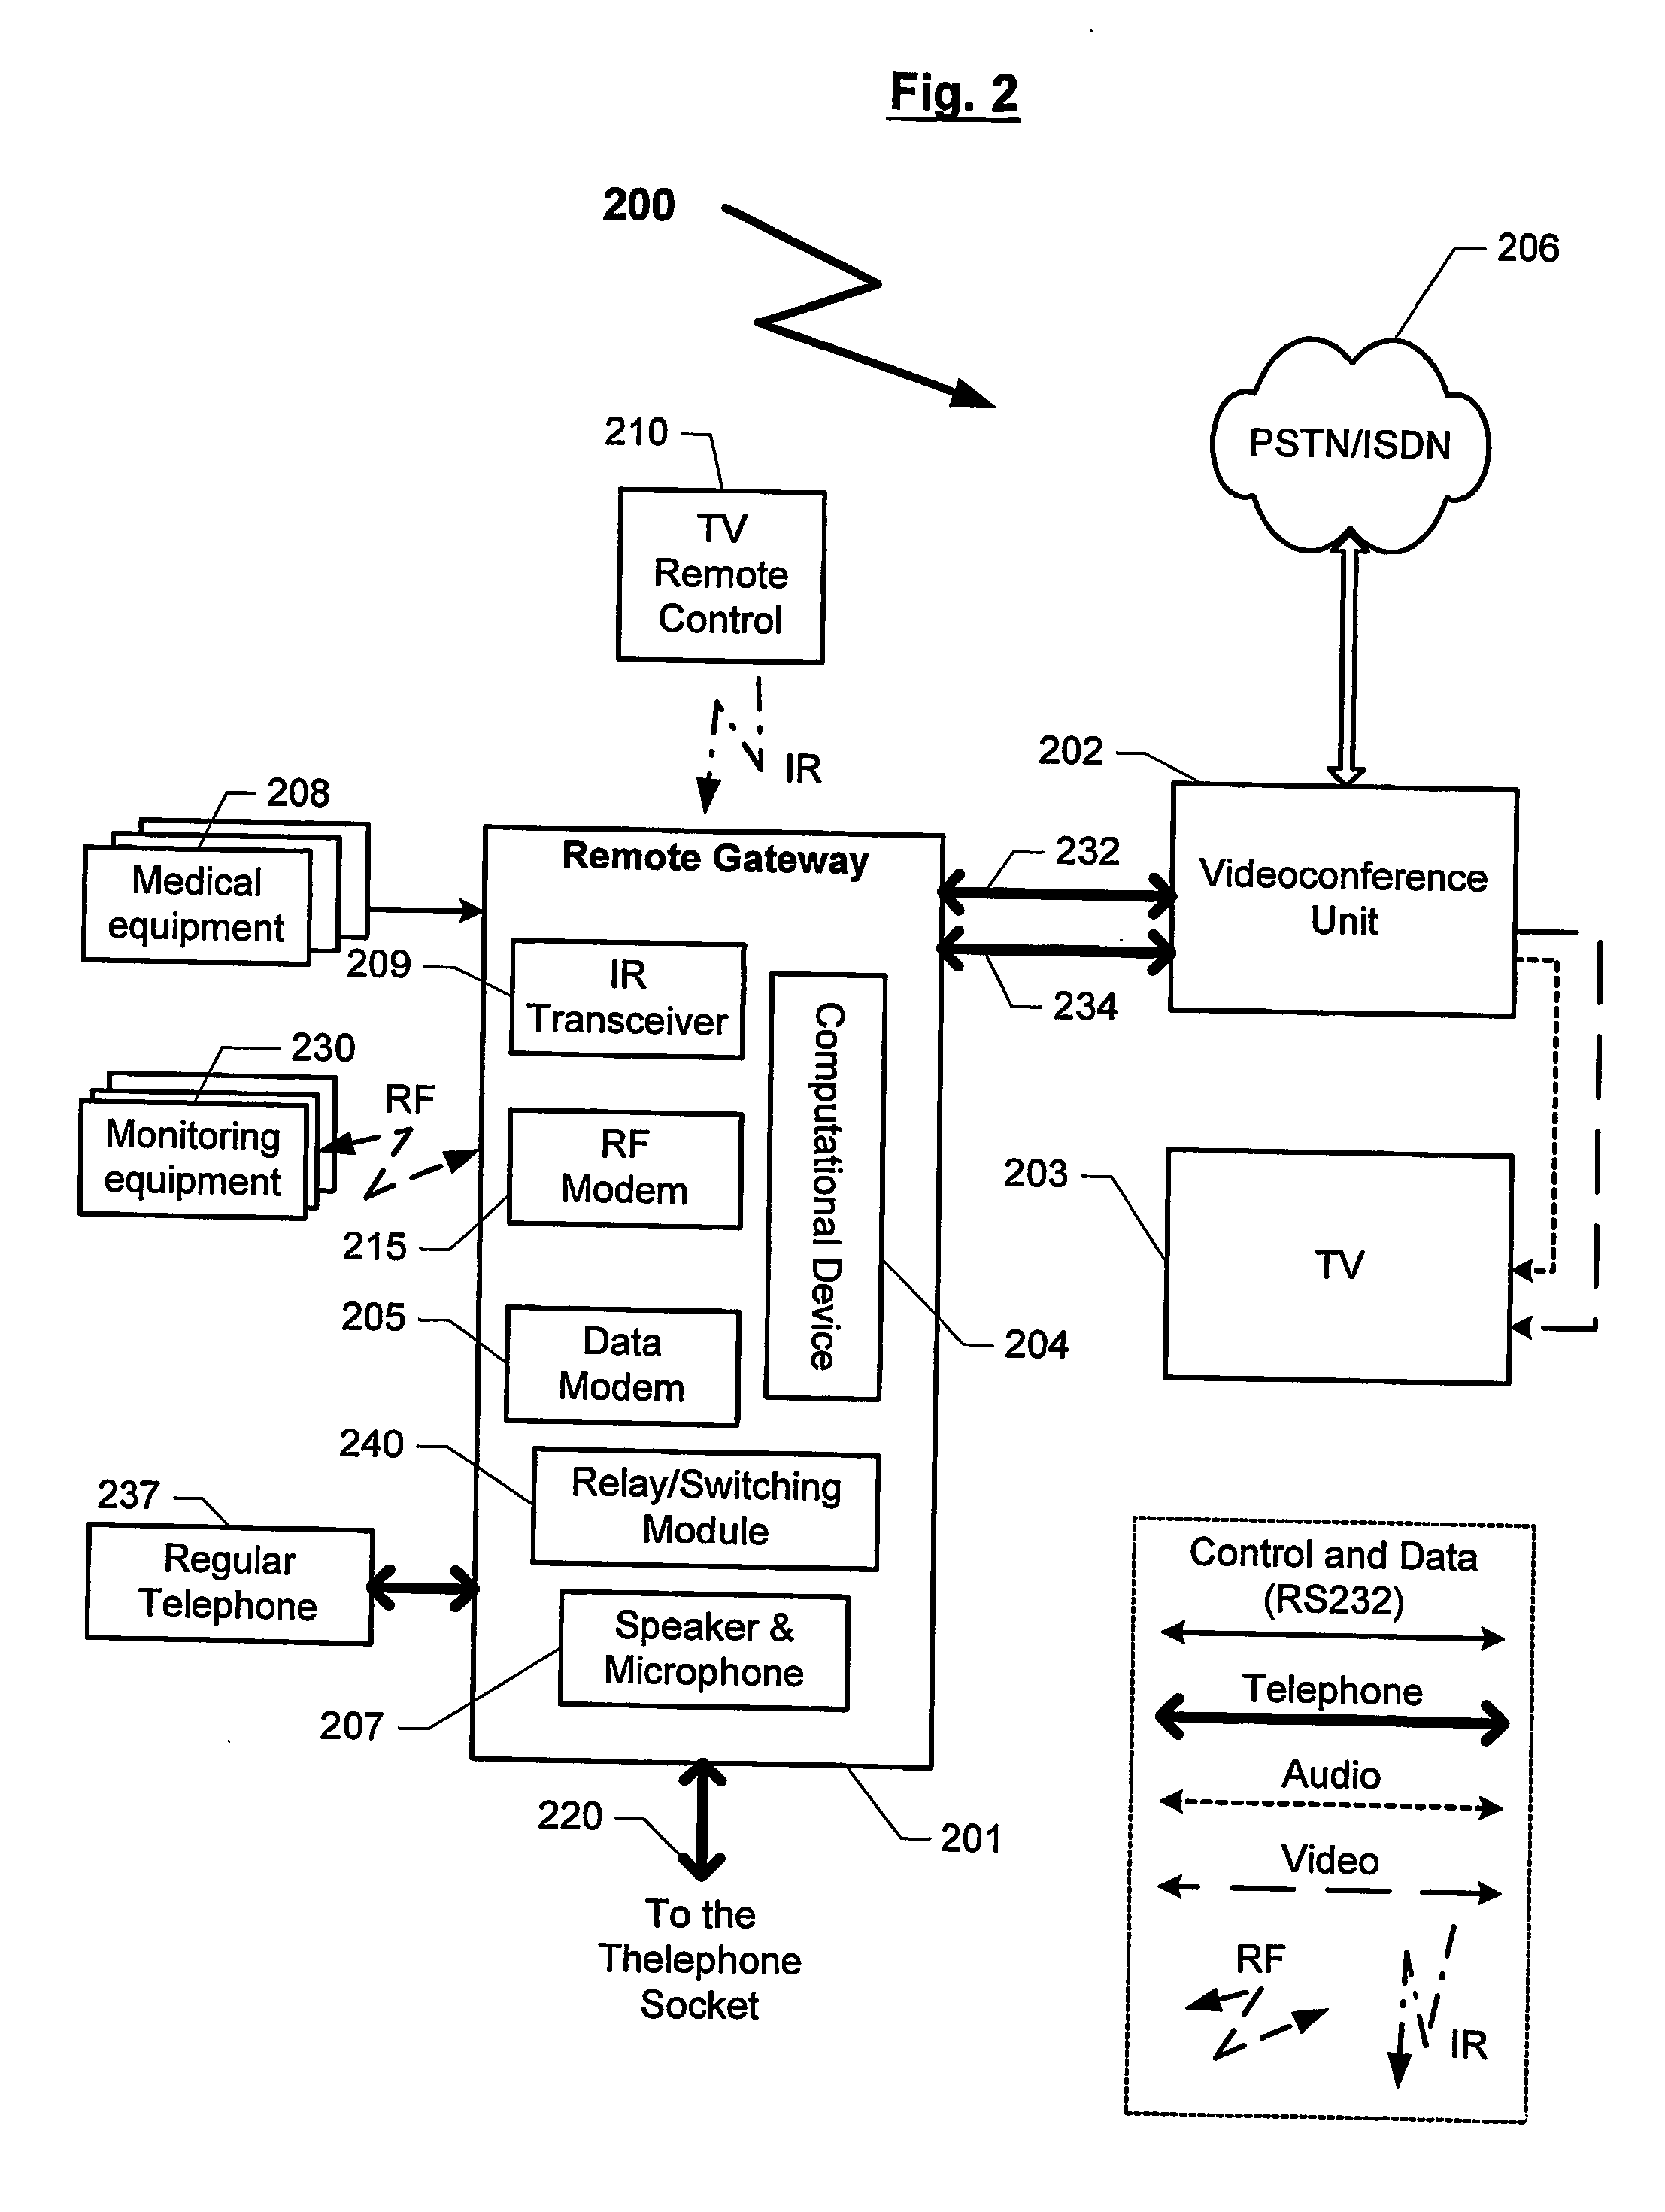 Visual medical monitoring system for a remote subject